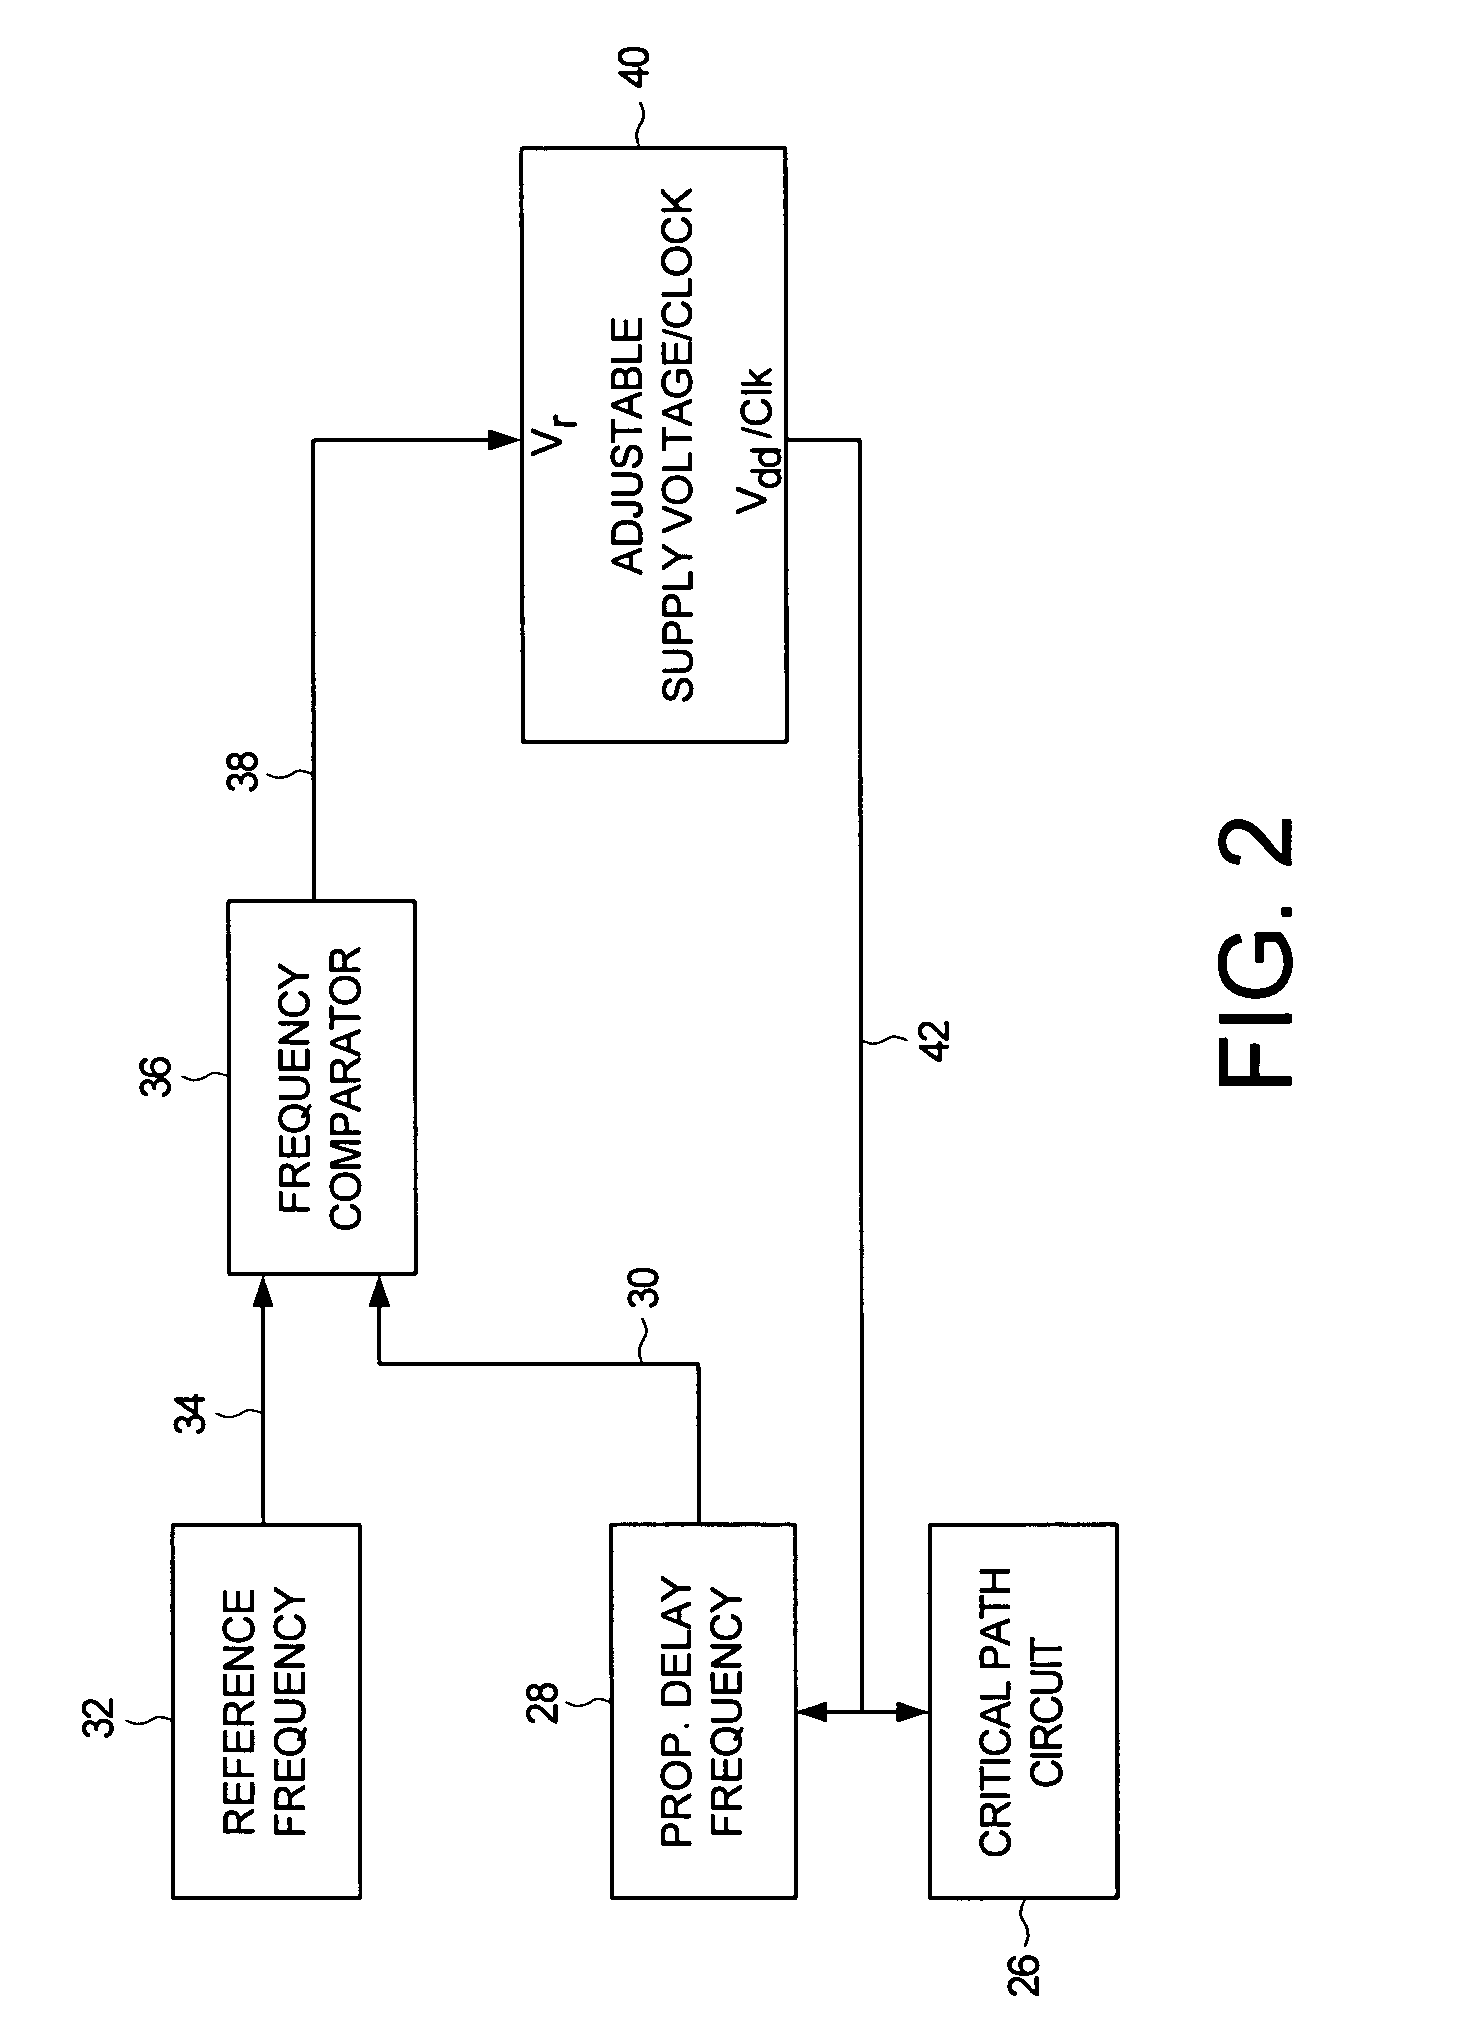 Adjusting power consumption of digital circuitry by generating frequency error representing error in propagation delay